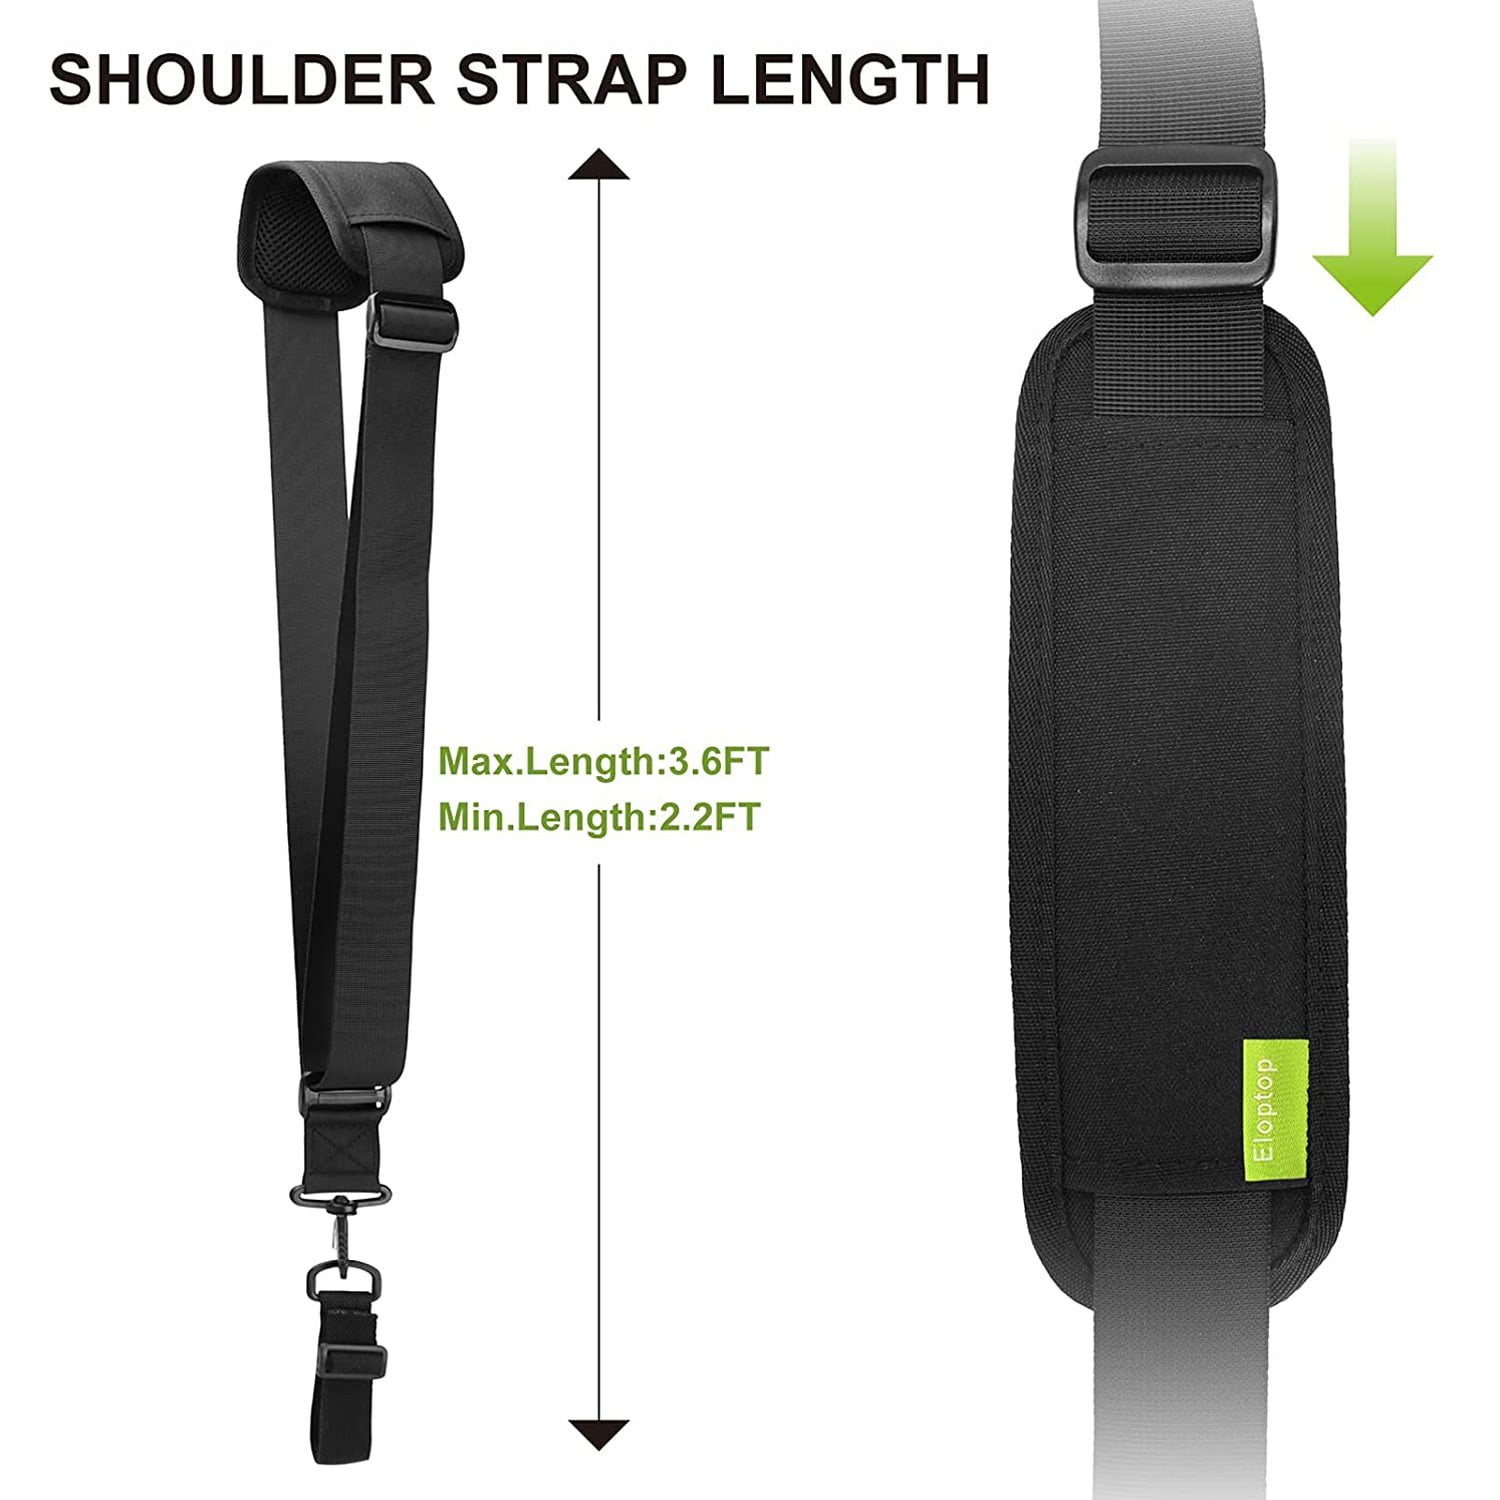 Compatible with EGO String Trimmer and All Types Weed Eaters Clearance Lanica Shaoulder Strap Trimmer Strap Blower Strap Weed Wacker Strap with Metal Hook Universal for Multi Head System 